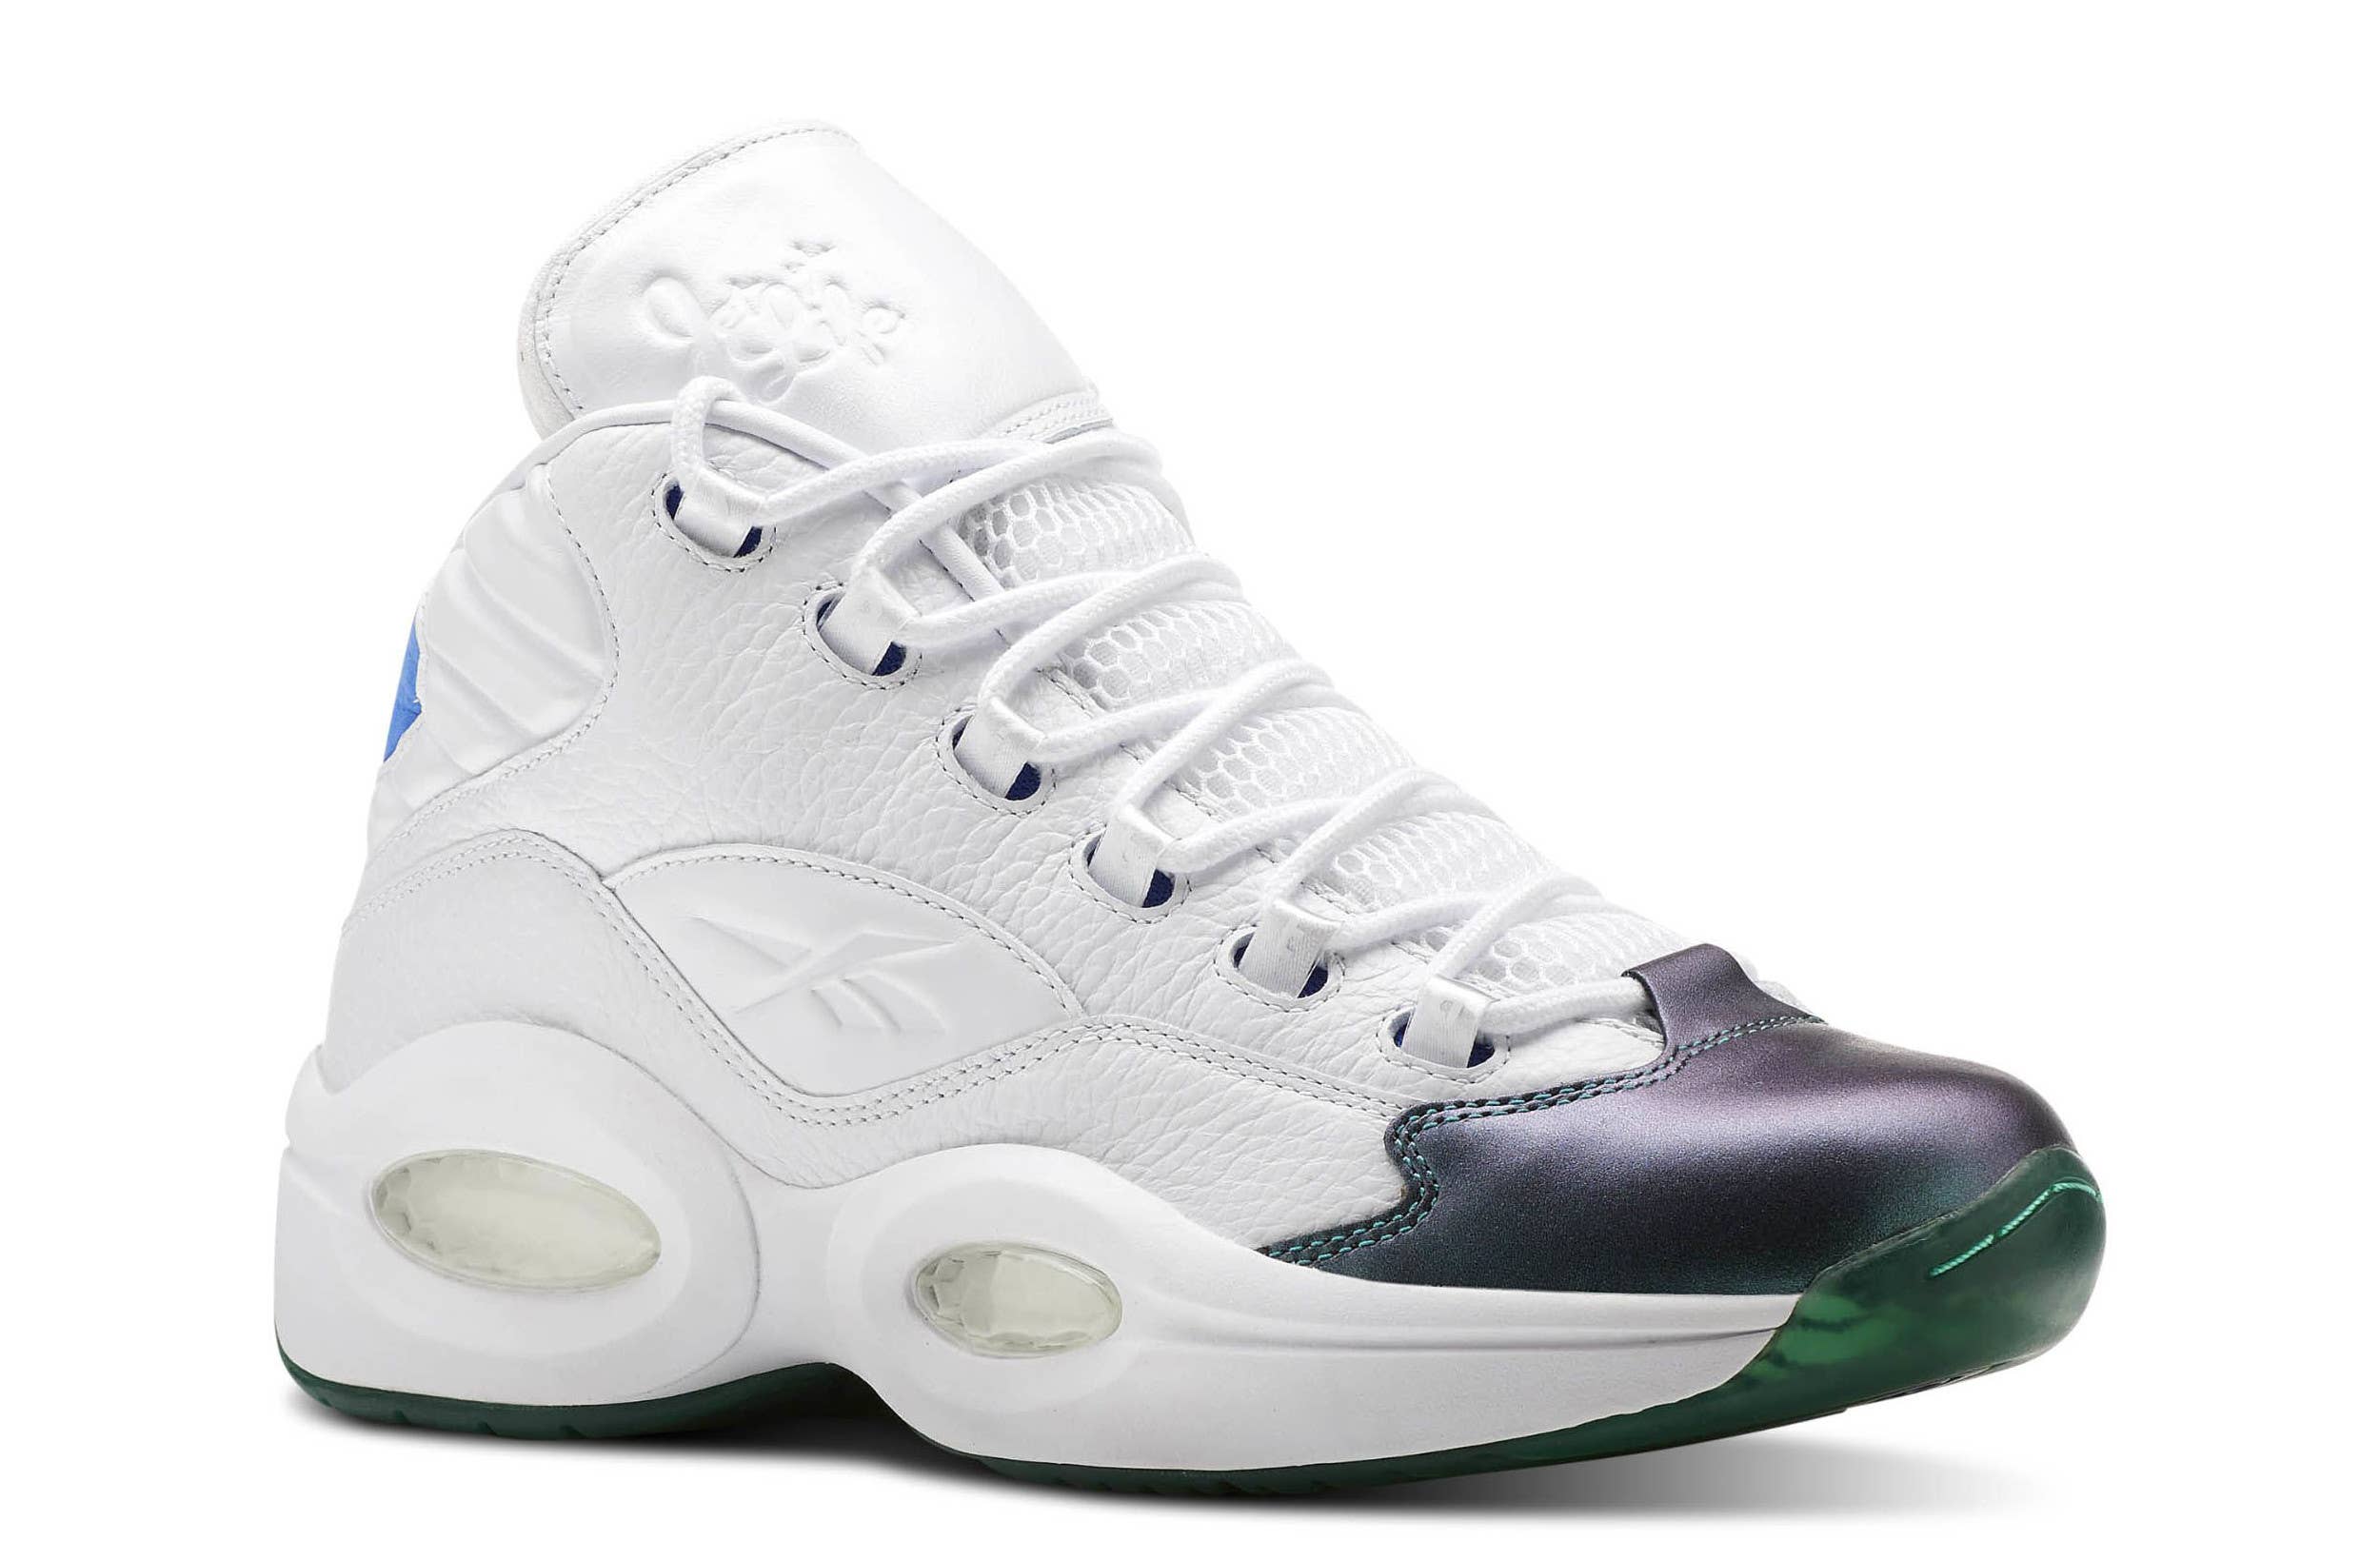 Currensy x Reebok Question Mid 'Jet Life' CN3671 (Front)